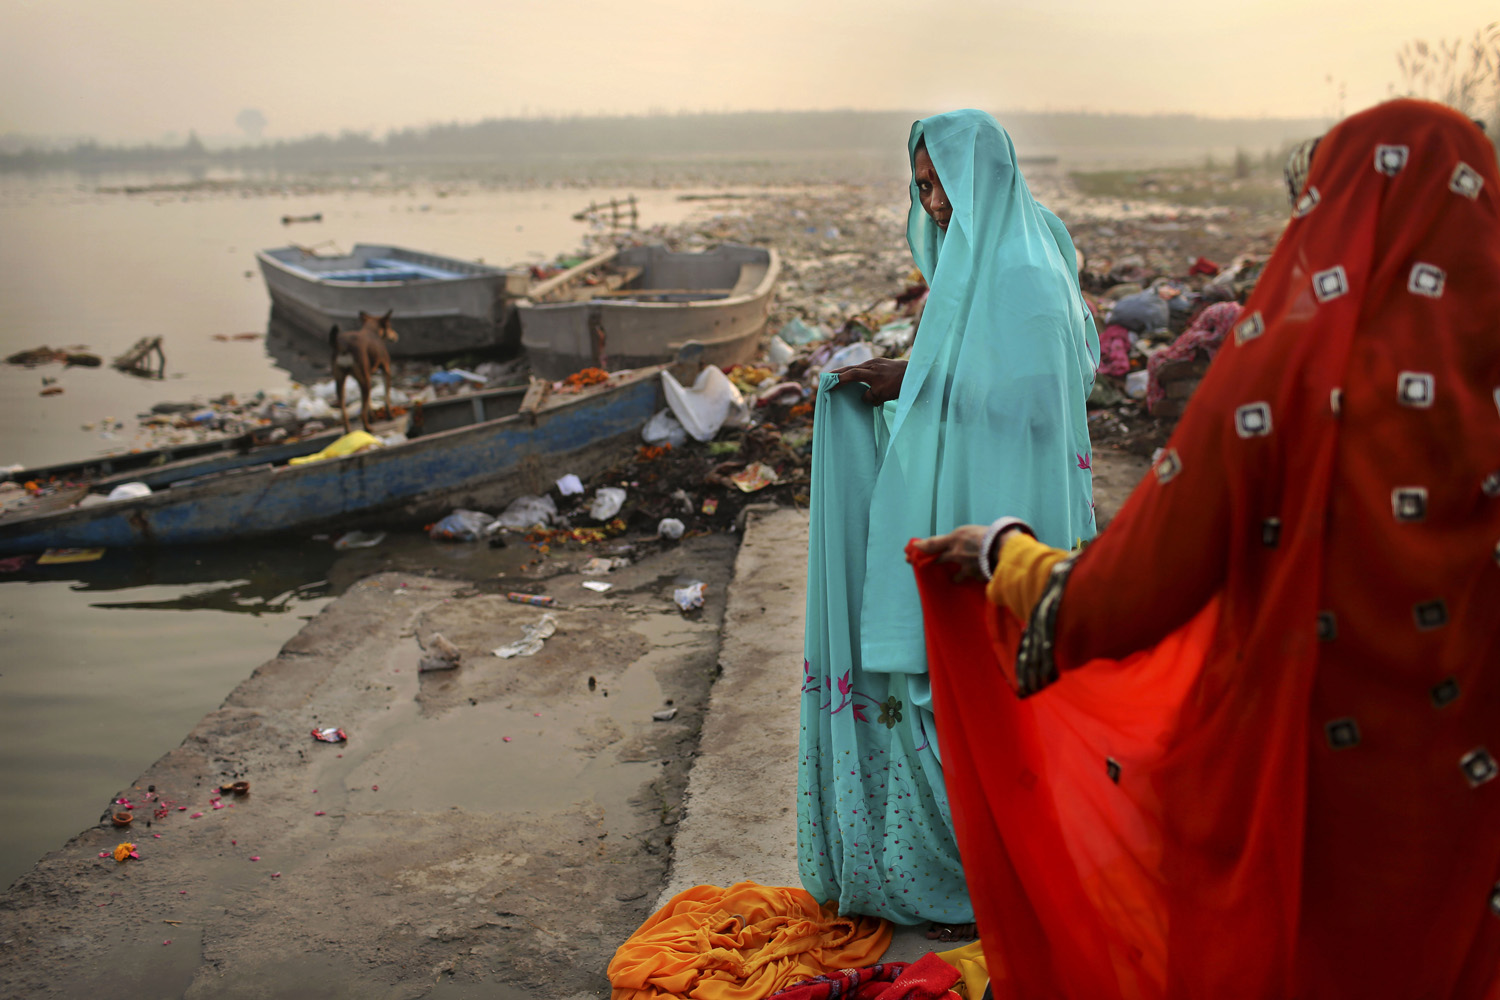 Image: Oct. 29, 2012. Hindu devotees put on saris after taking a holy dip in the Yamuna River on Sharad Purnima, an auspicious day for the new moon in the fall, in New Delhi.